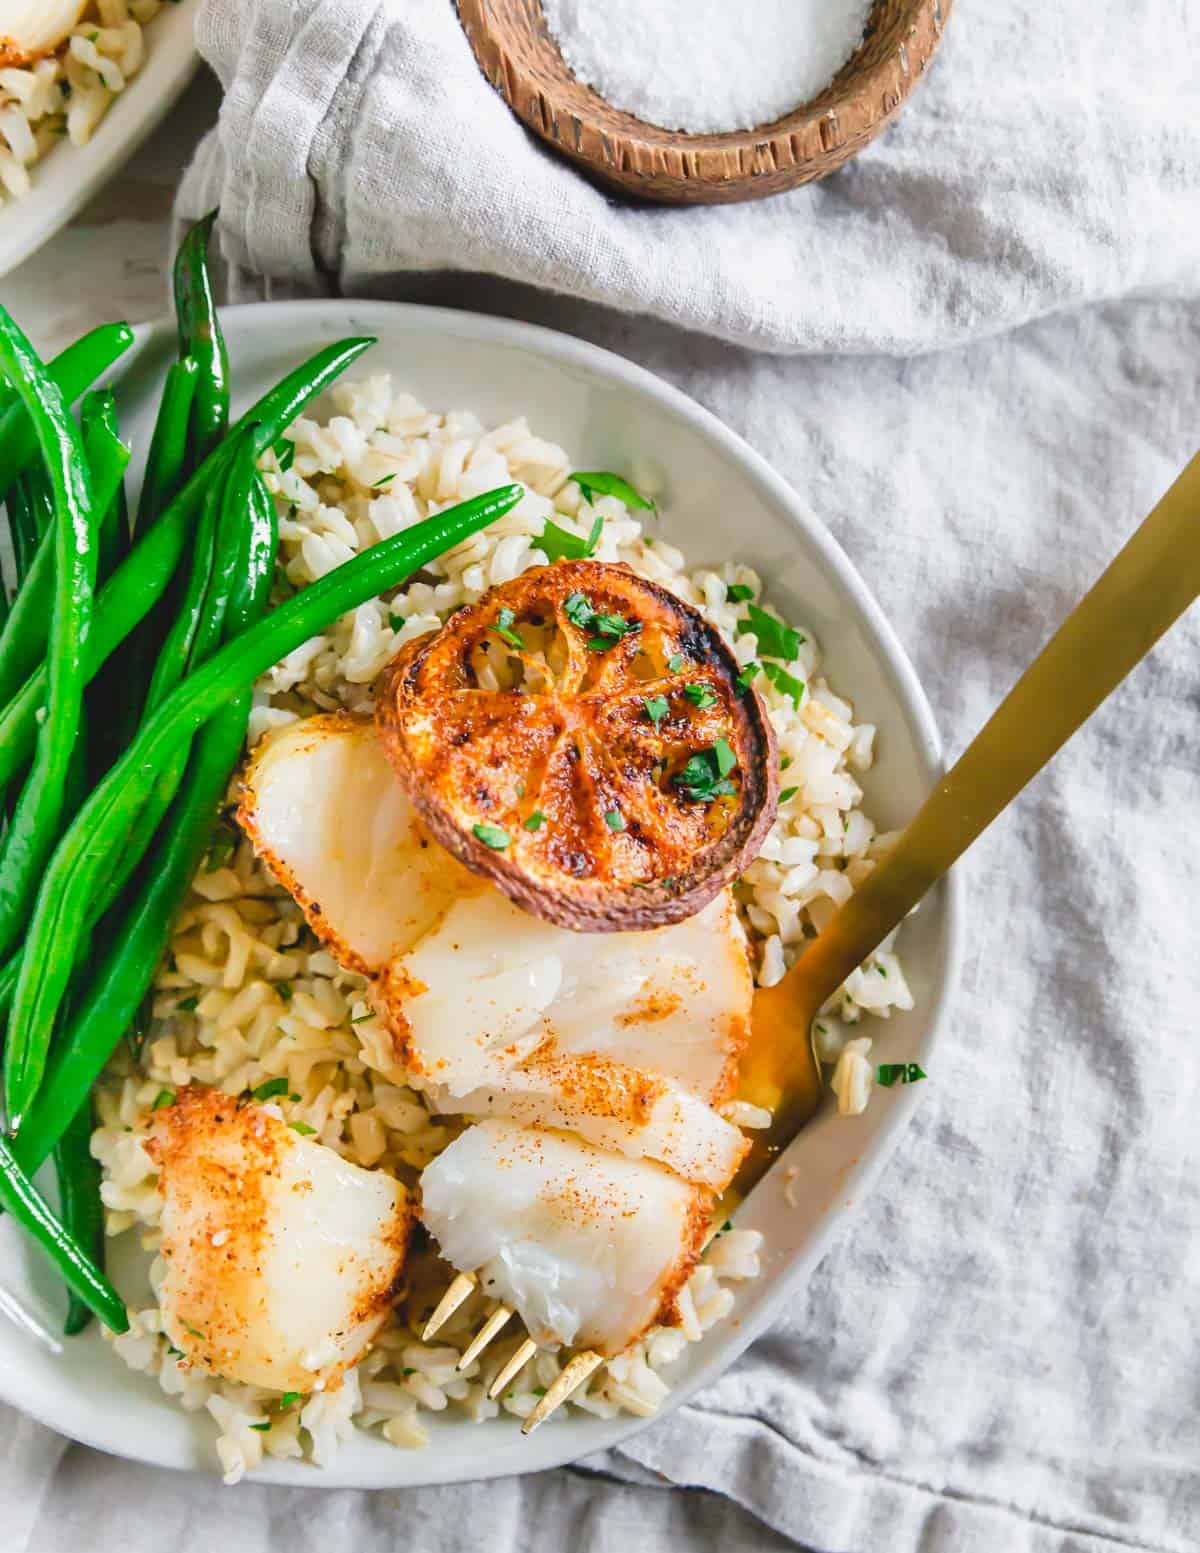 Learn how to make air fryer cod with this easy recipe using lemon and spices for a tender, delicate and delicious cod fish dinner in under 20 minutes.